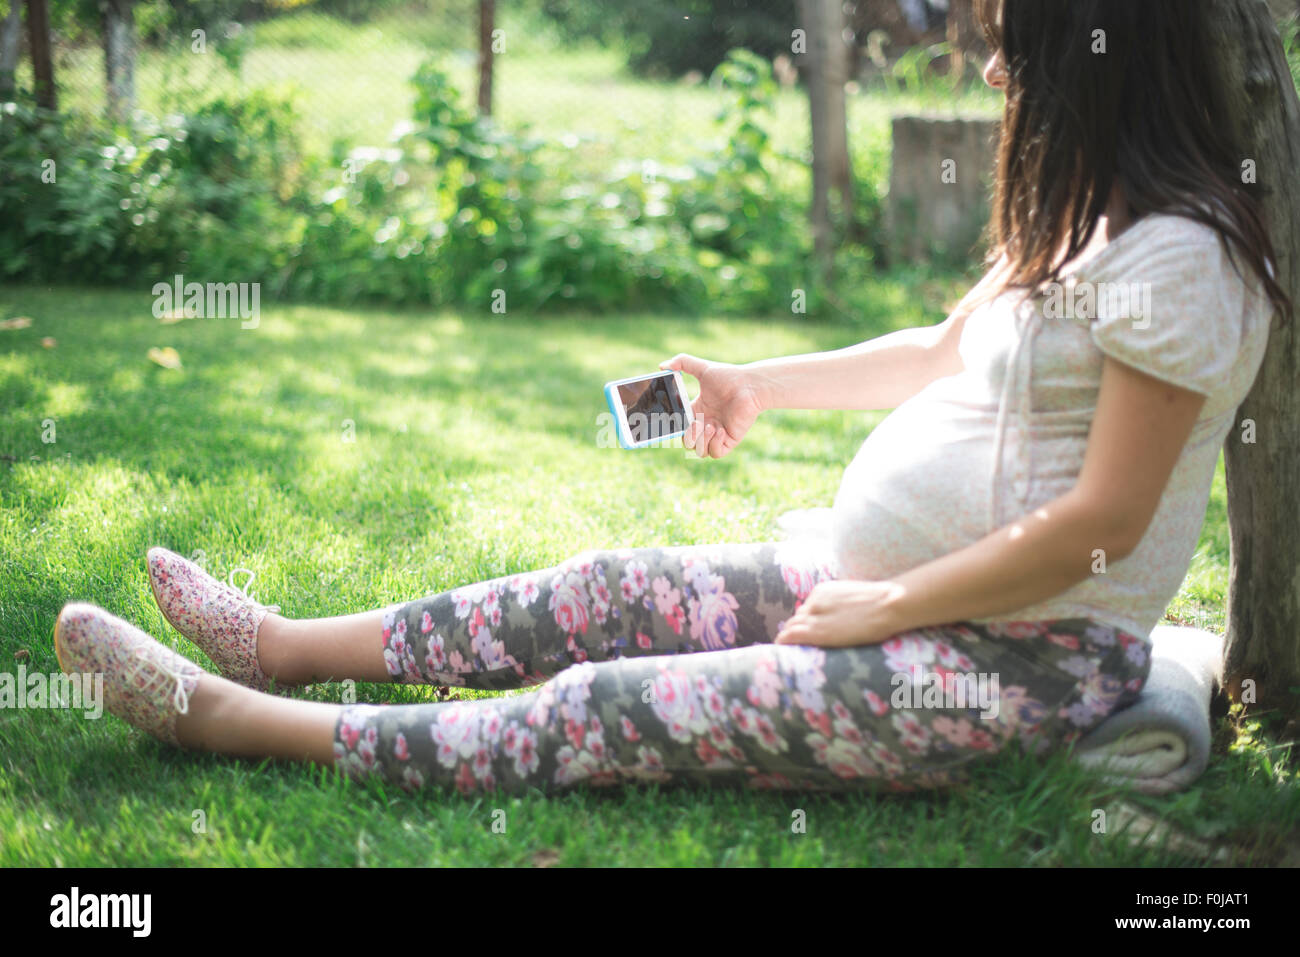 Pregnant women with smartphone in a garden Stock Photo